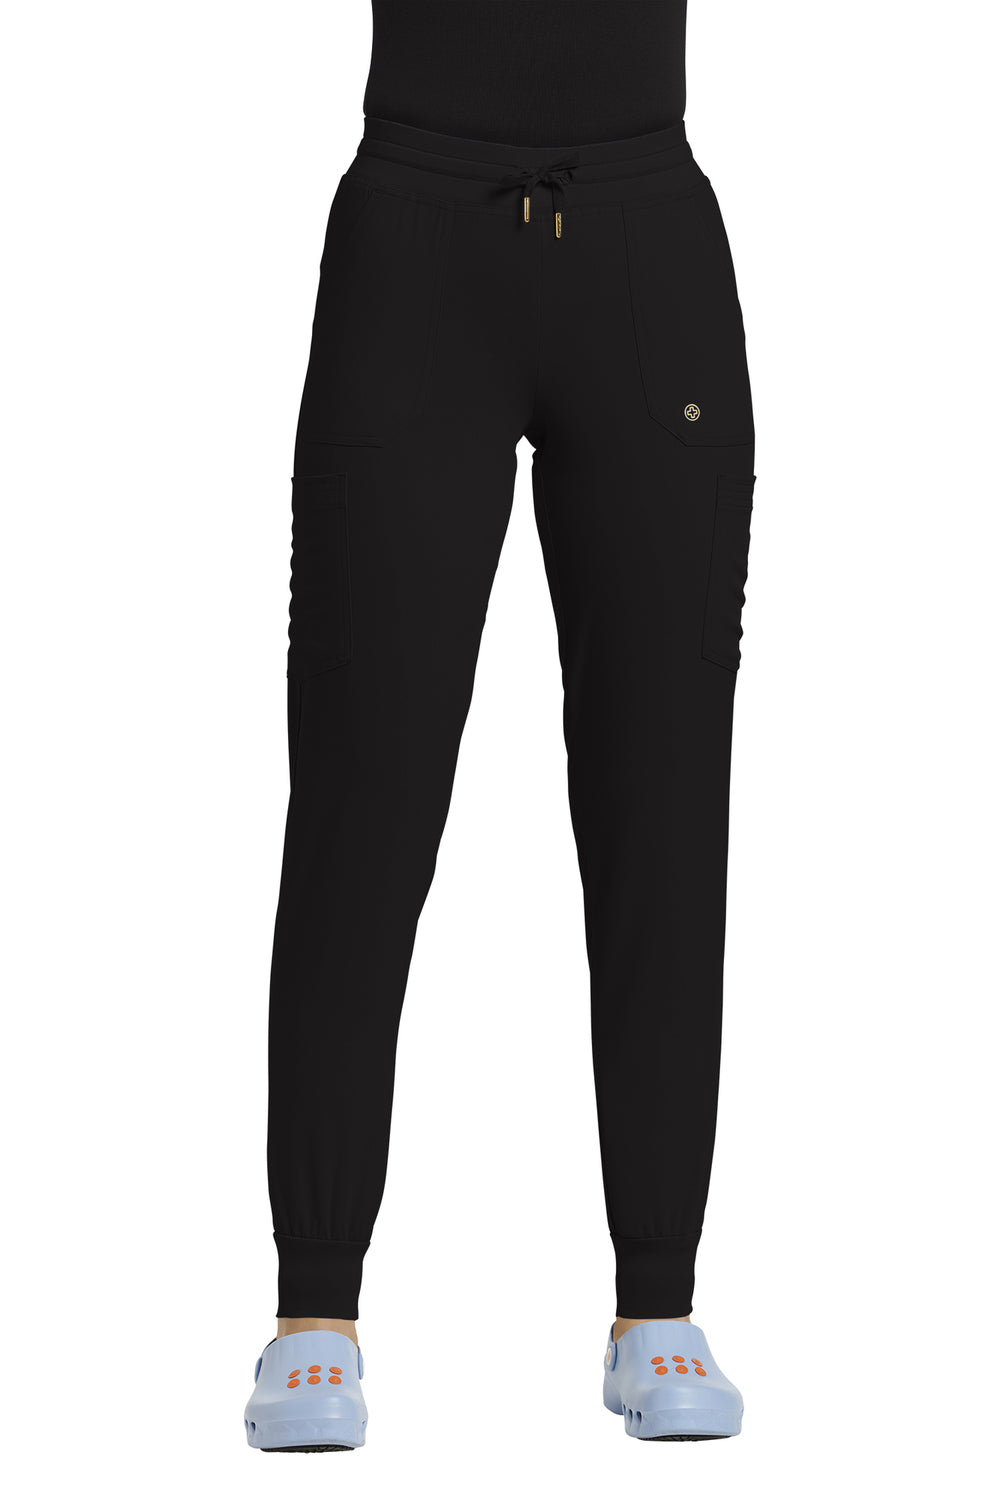 Marvella Easy Fit Jogger Pants SPECIAL!